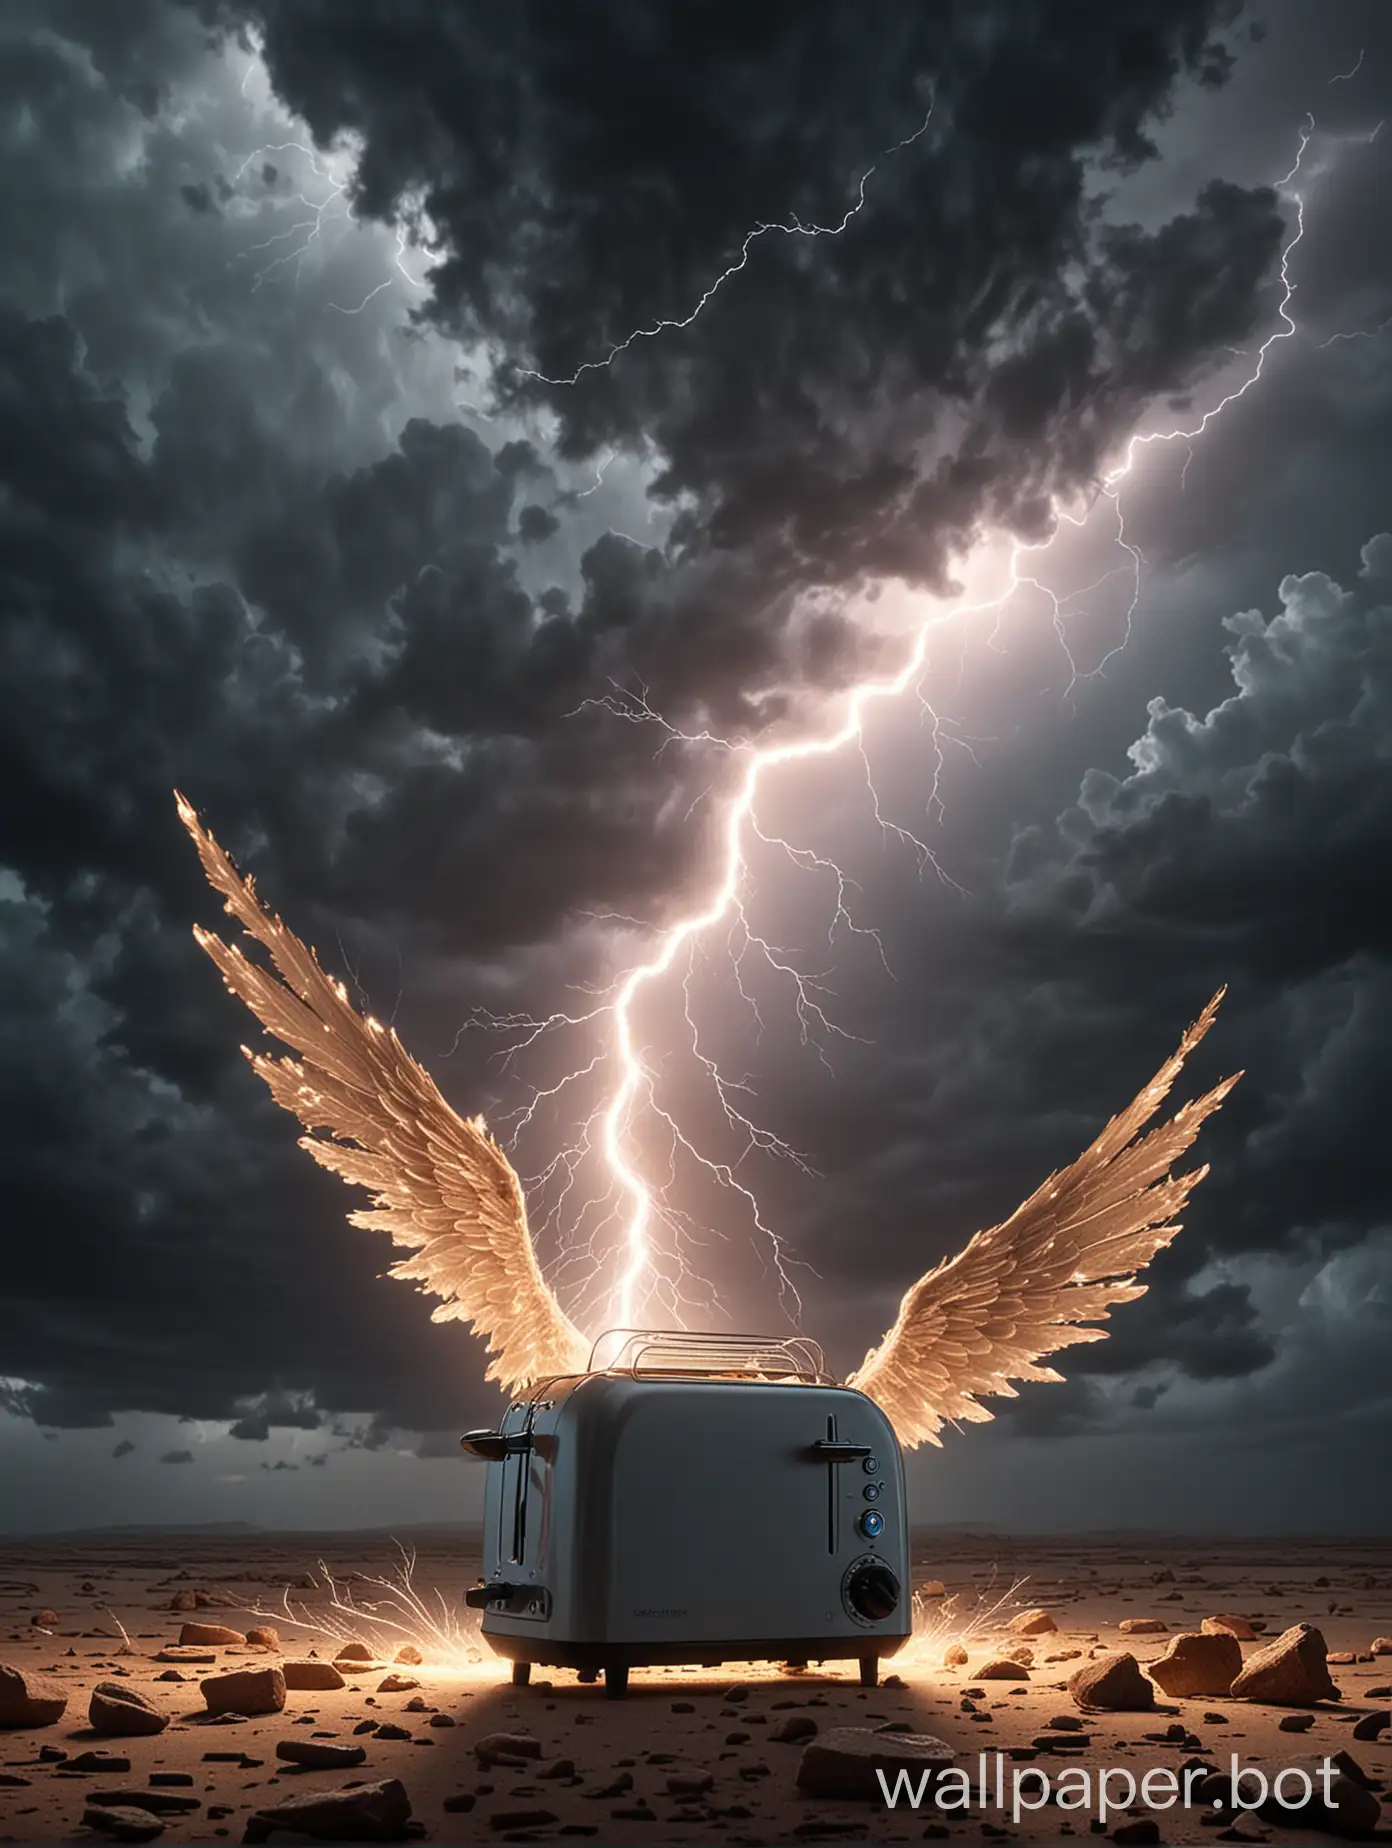 generate a toaster with wings in the stormy sky which is getting shock by an lightning